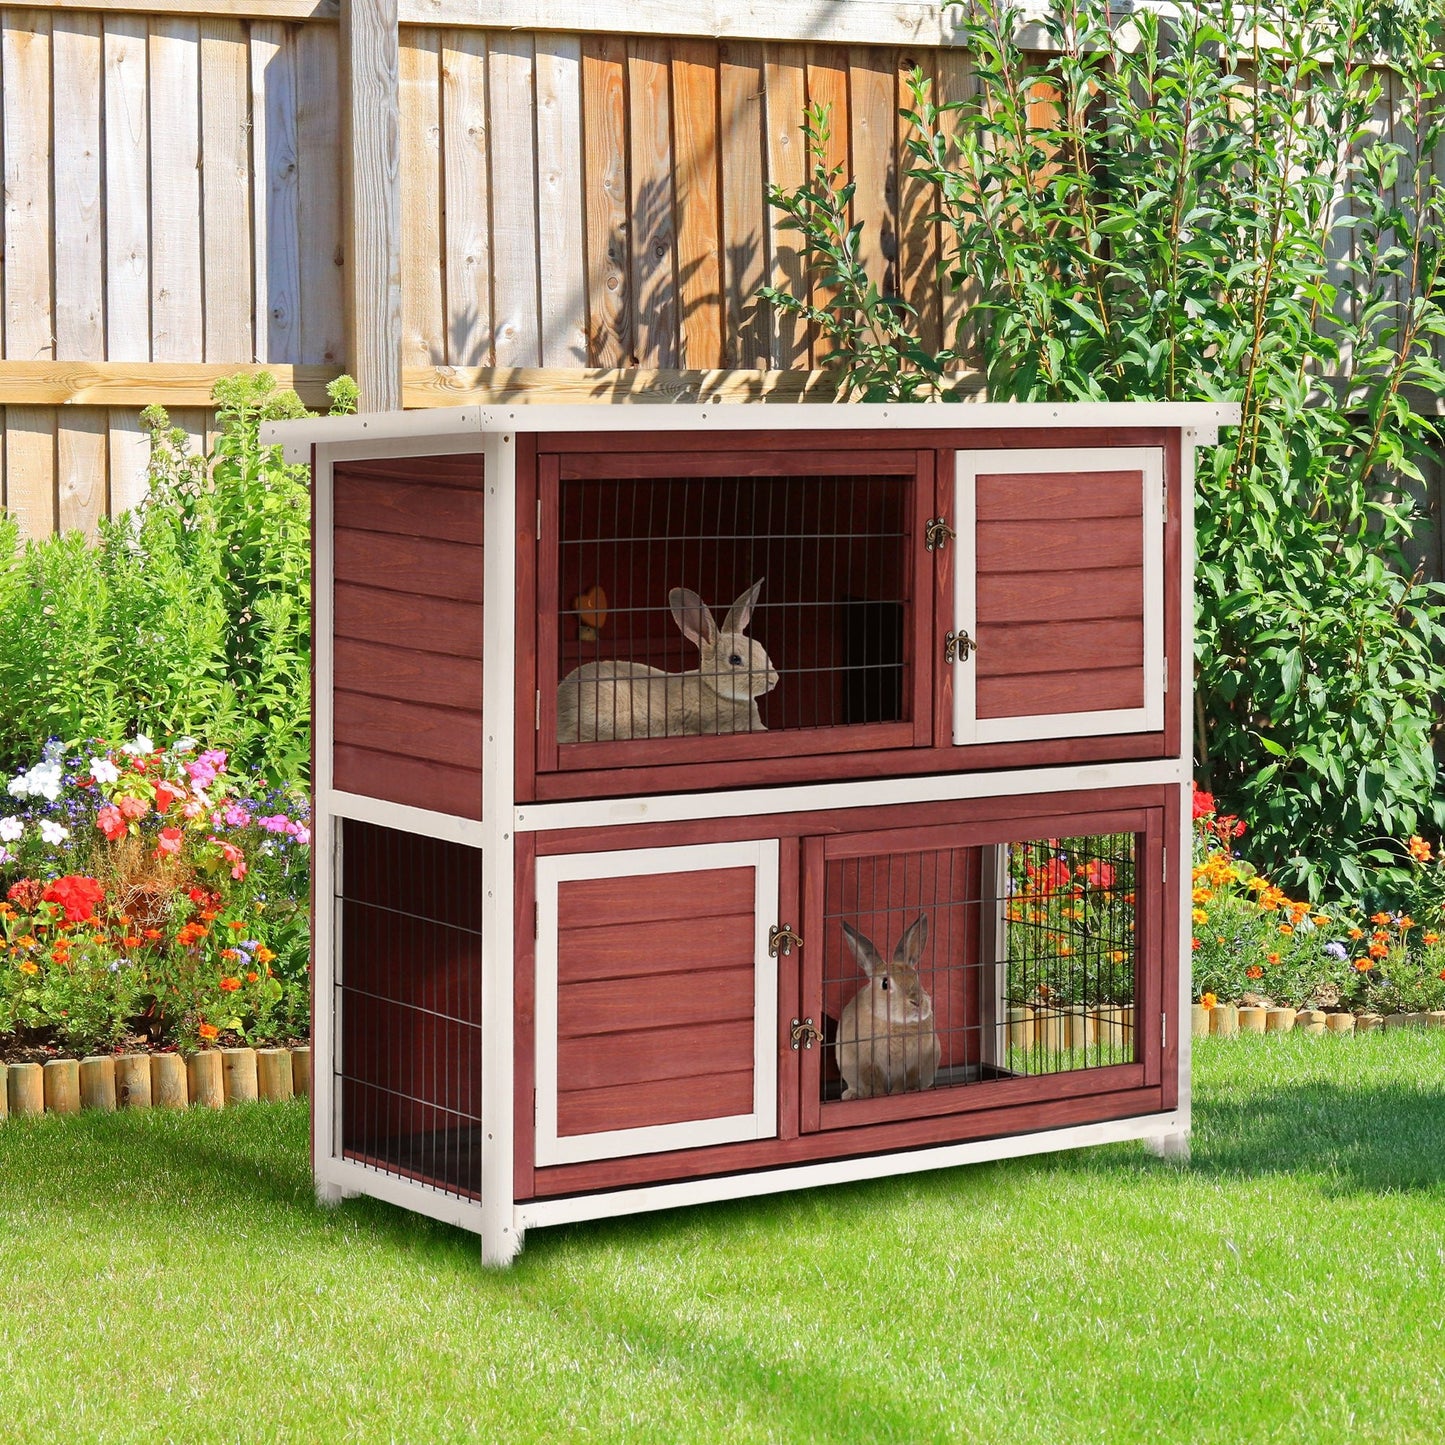 -PawHut 48" 2-Story Wooden Rabbit Hutch, Elevated Bunny Cage, Small Animal Habitat with Ramp, Tray and Openable Top, Outdoor/Indoor, Brown - Outdoor Style Company